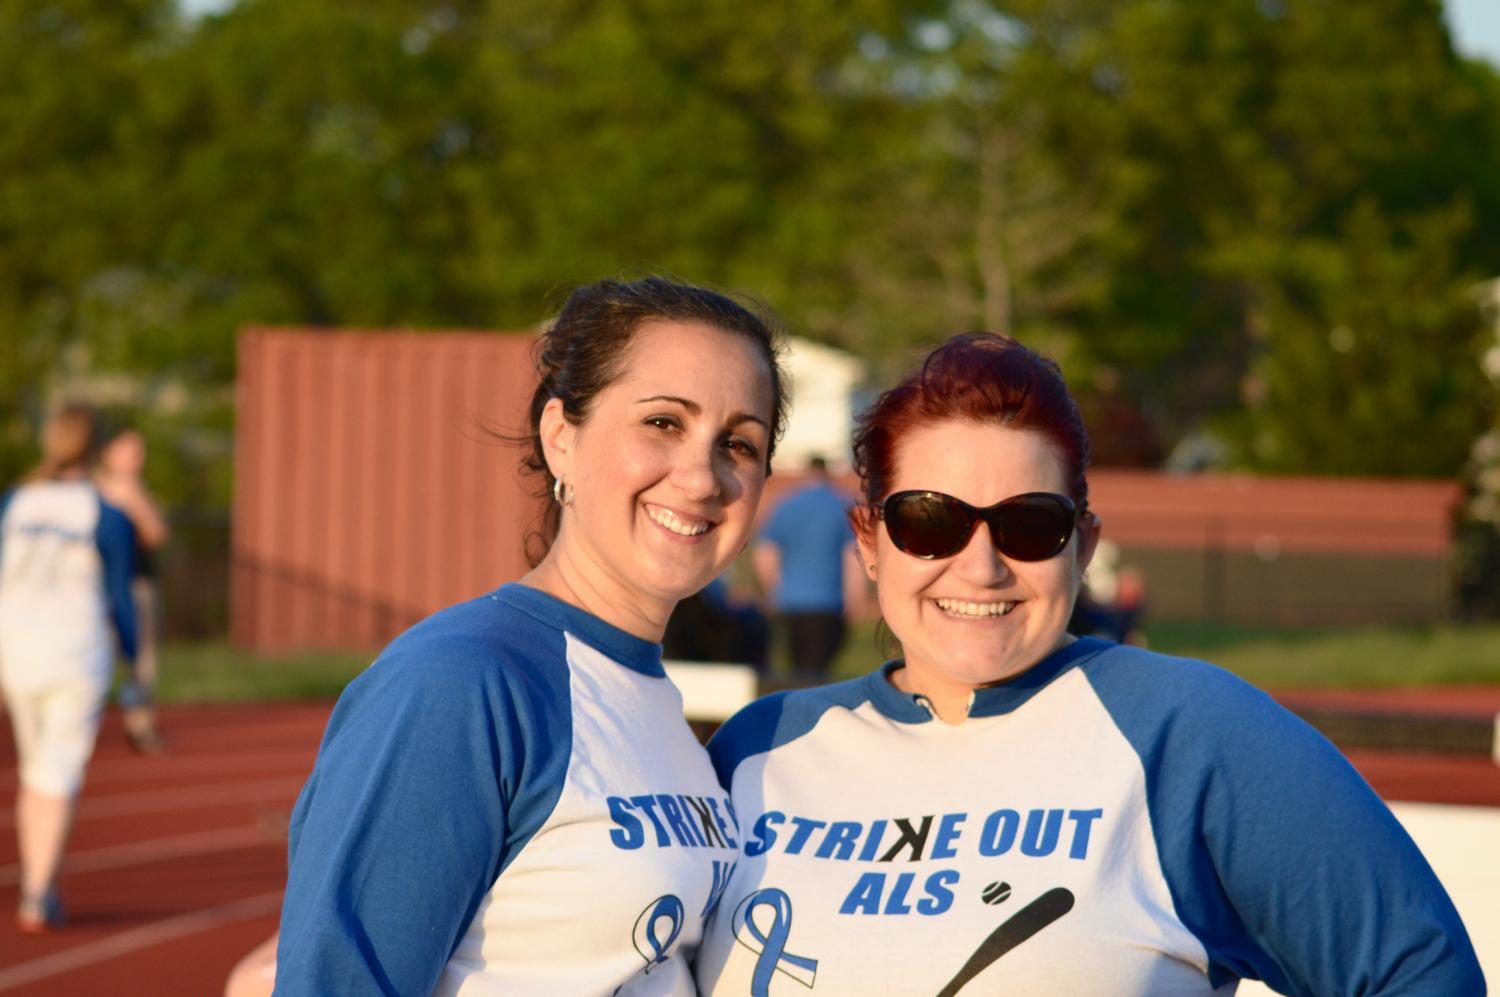 Mrs. Bing and Mrs. Cani, teachers and advisors, were part of the team responsible for organizing and fundraising for the event.